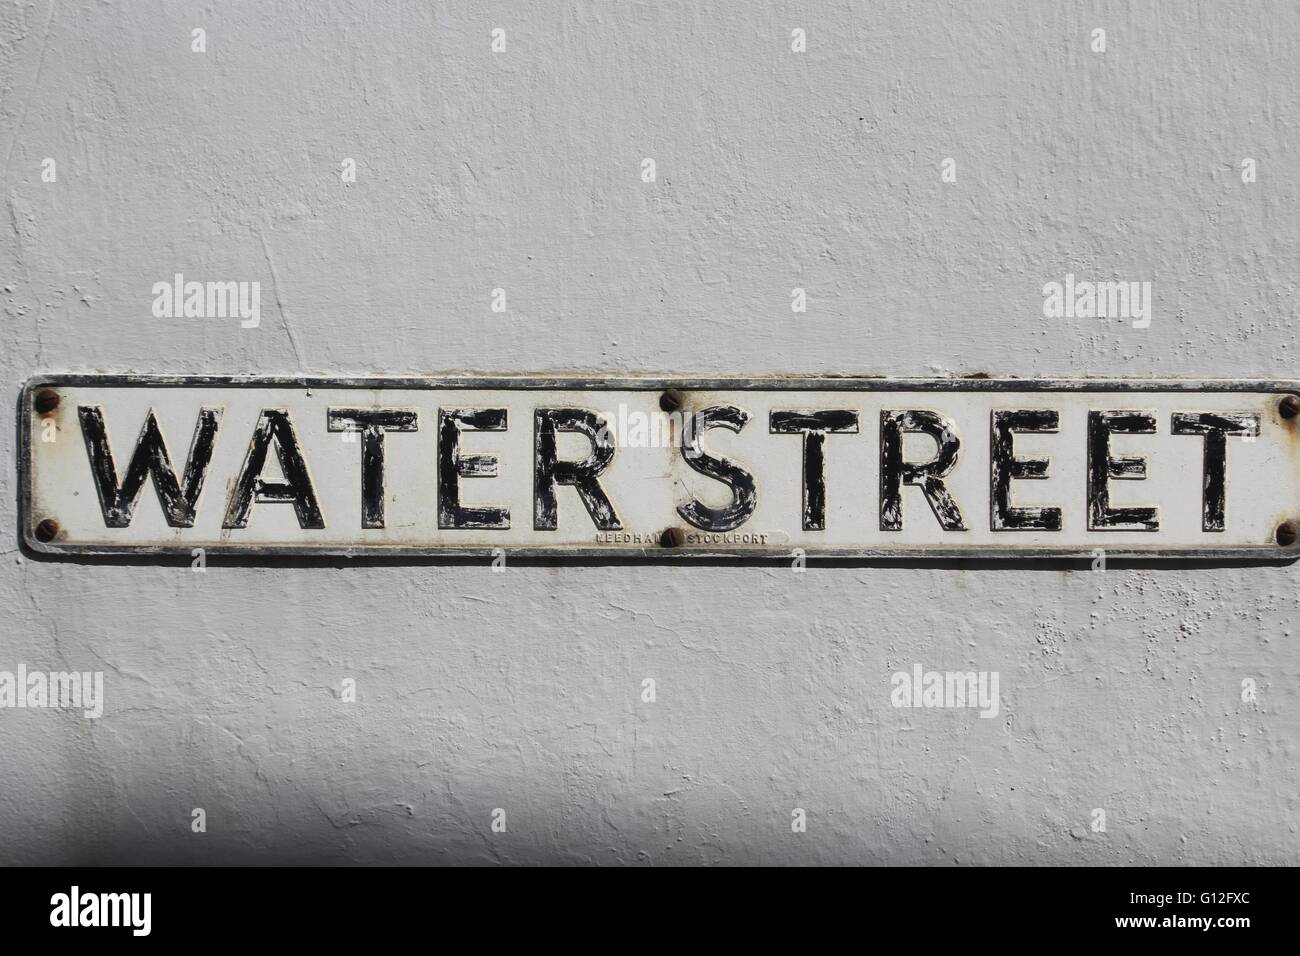 Old metal street sign with black letters on a white background saying 'Water Street' mounted on a white painted stone wall. Stock Photo